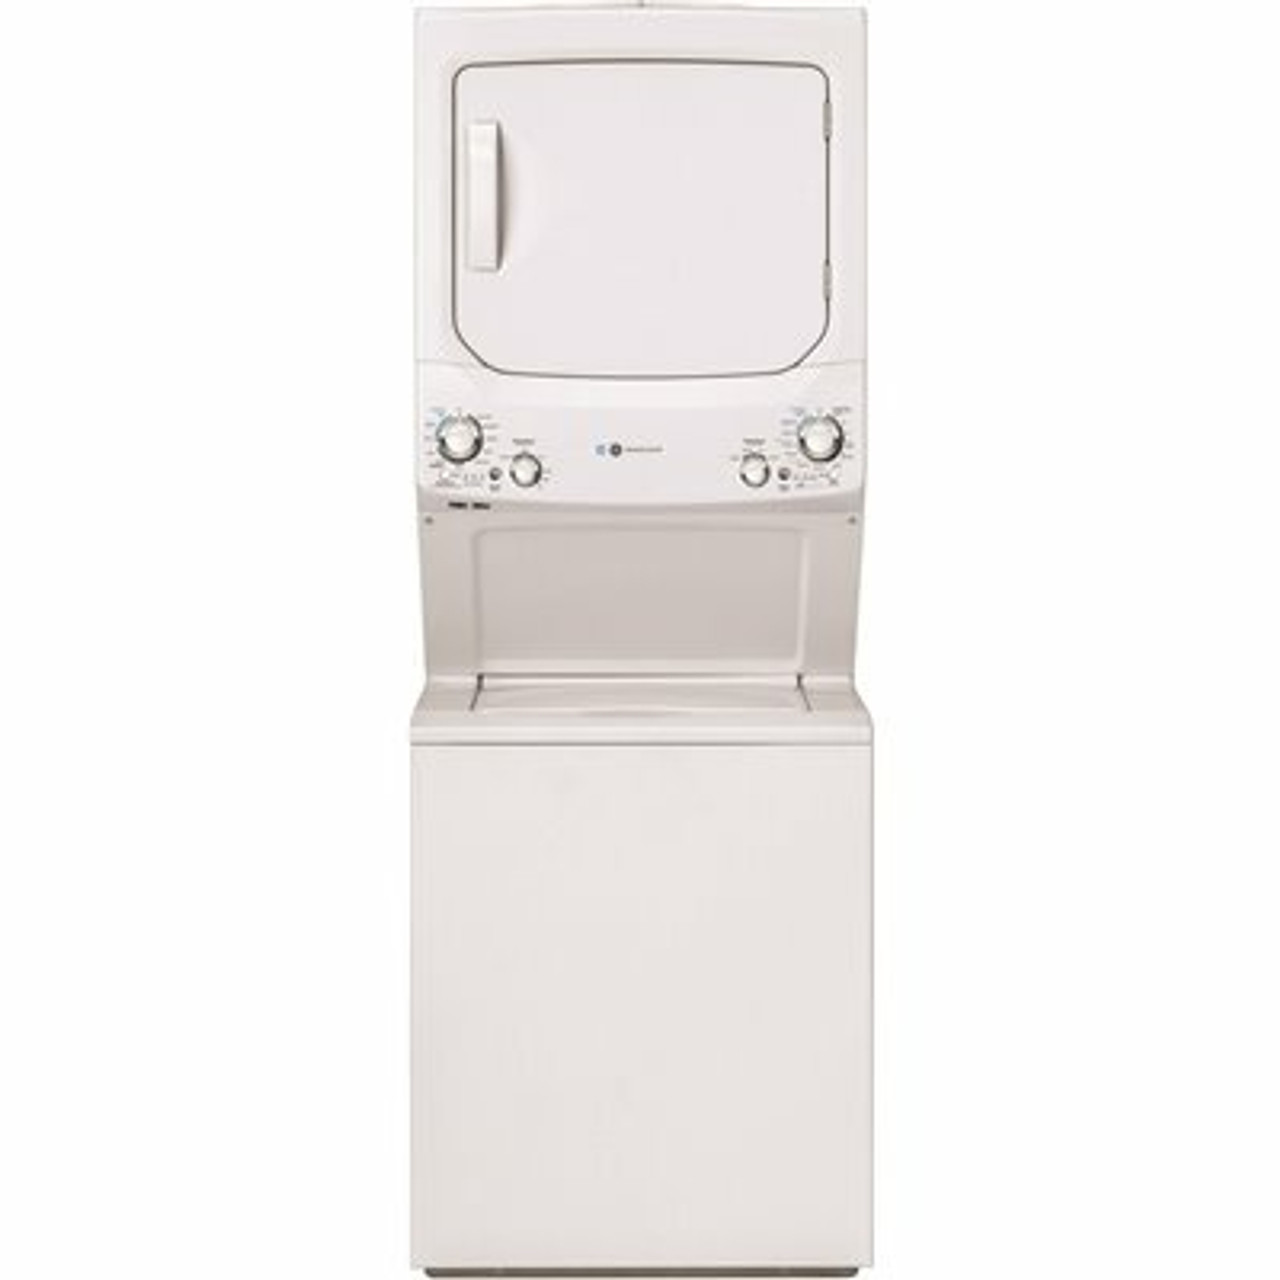 Ge White Laundry Center With 3.9 Cu. Ft. Washer And 5.9 Cu. Ft. 120 Volt Vented Gas Dryer, Energy Star